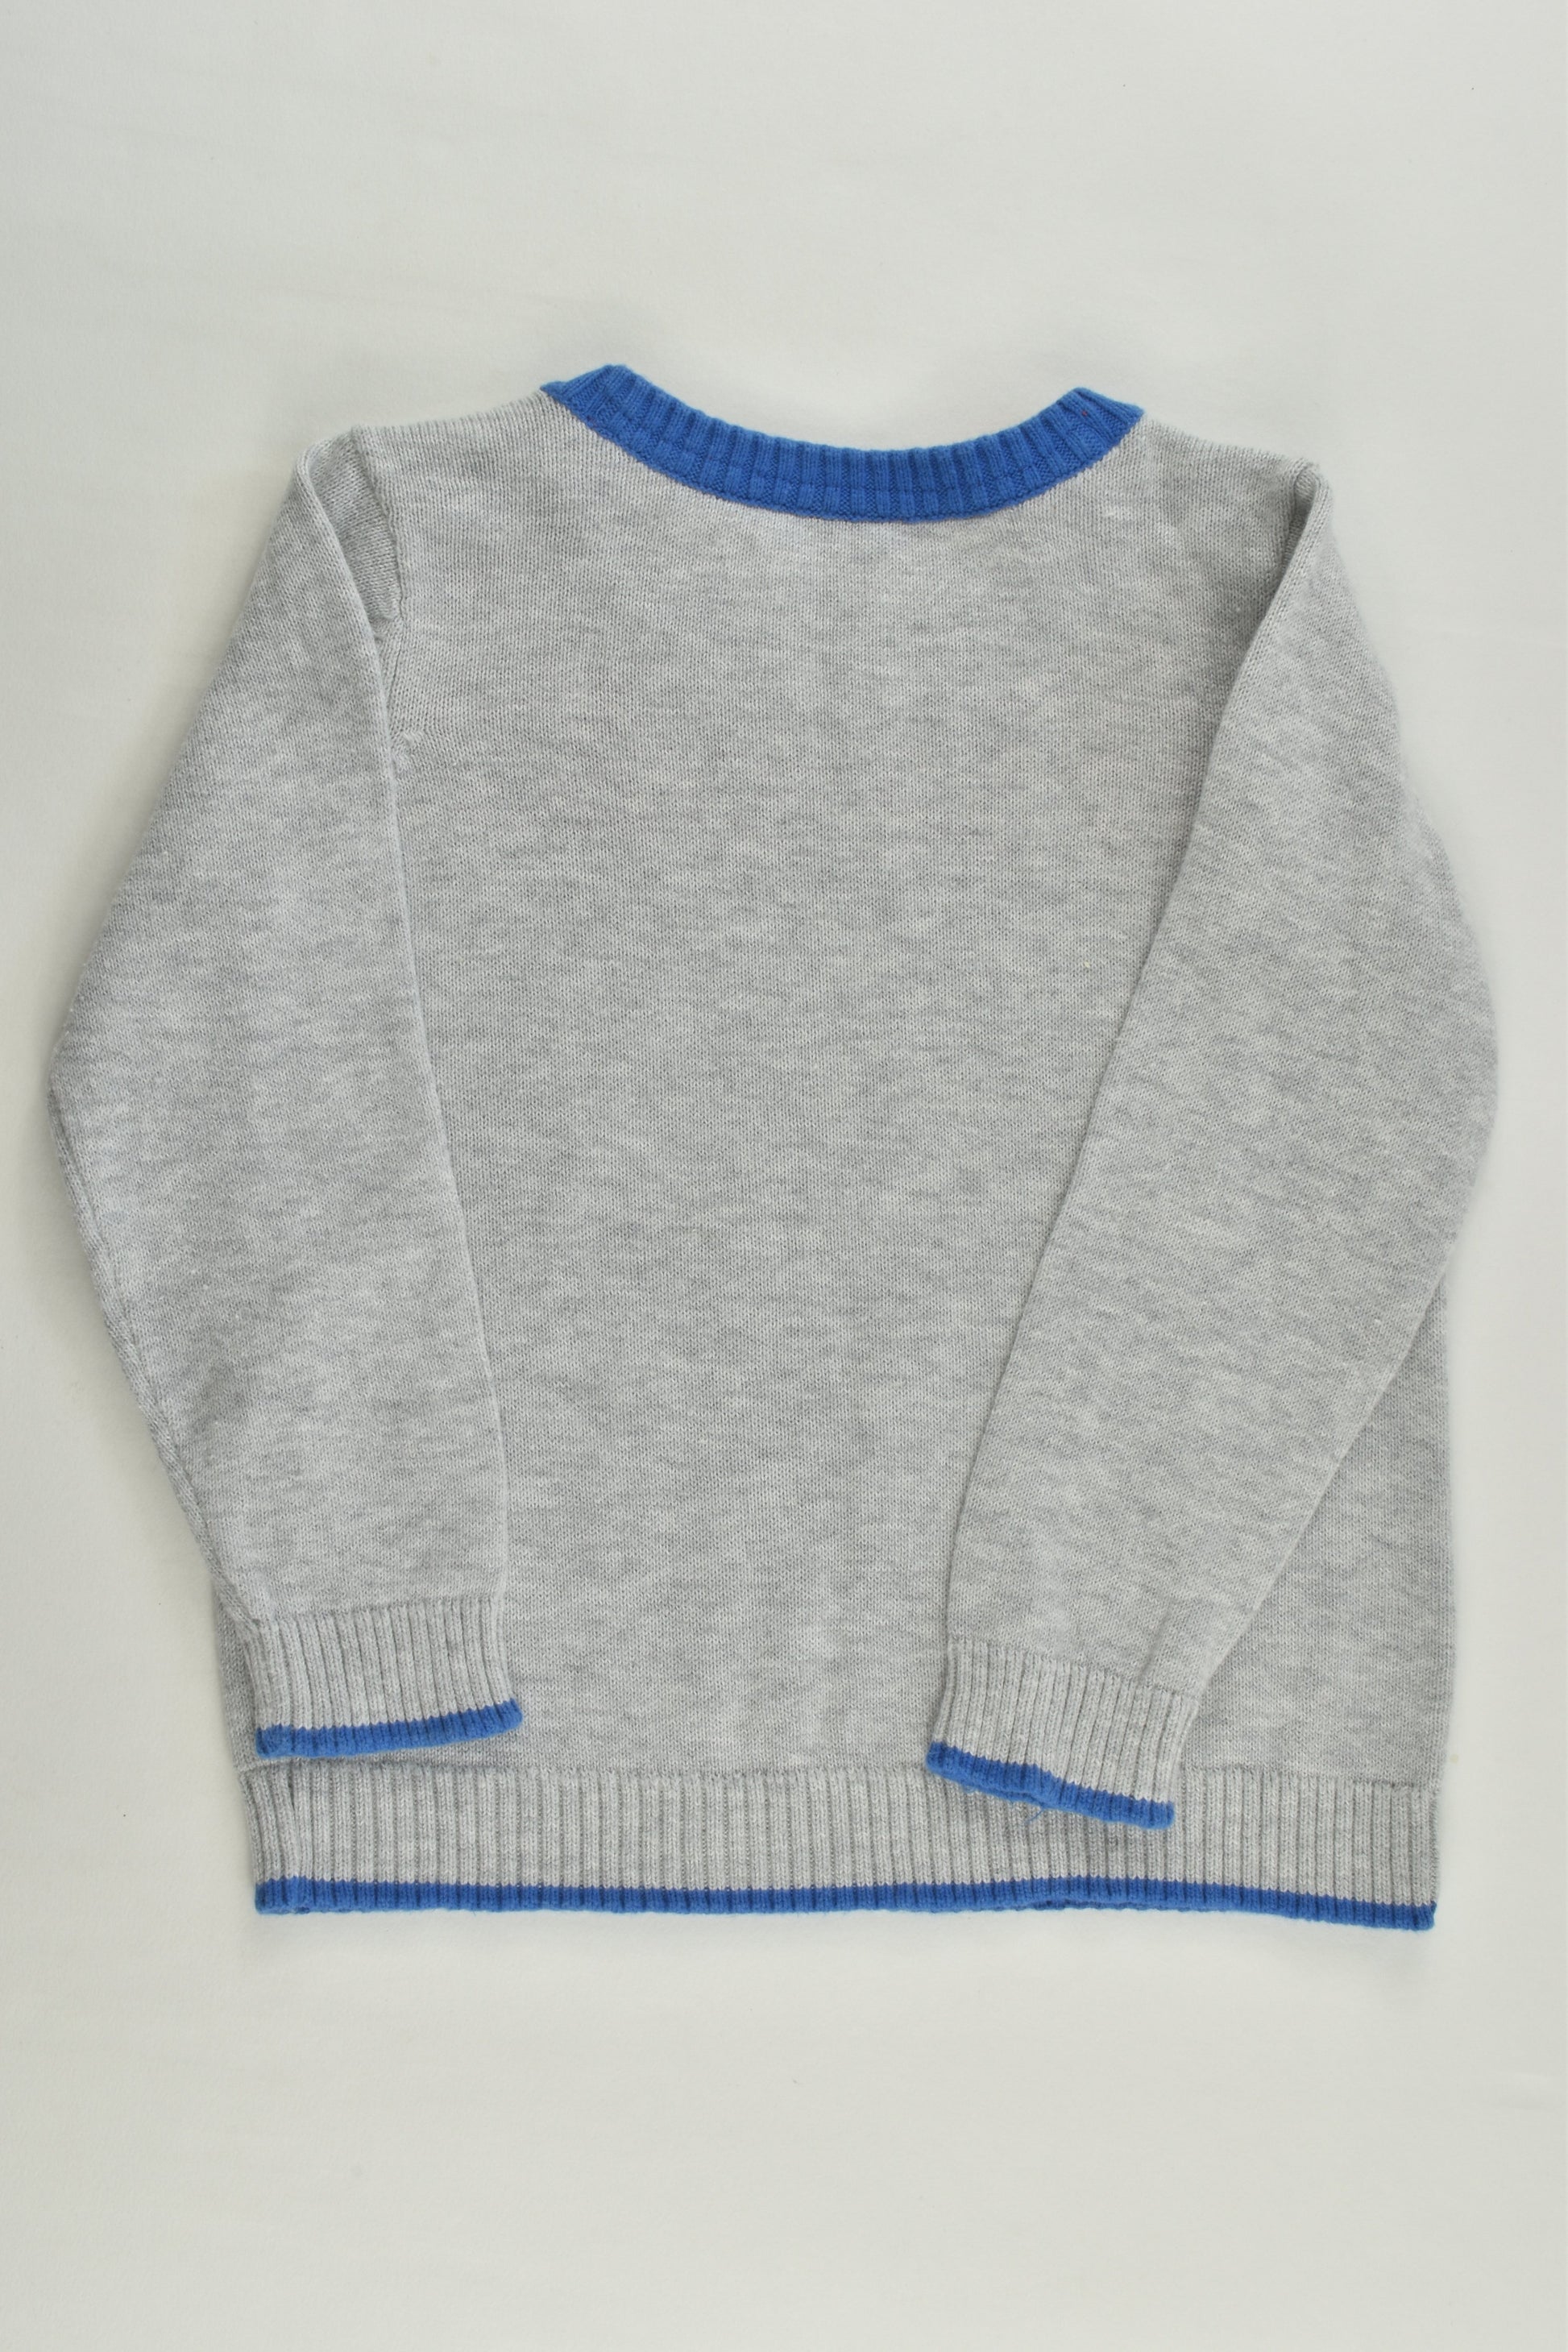 Target Size 1 Sailboat Knitted Jumper